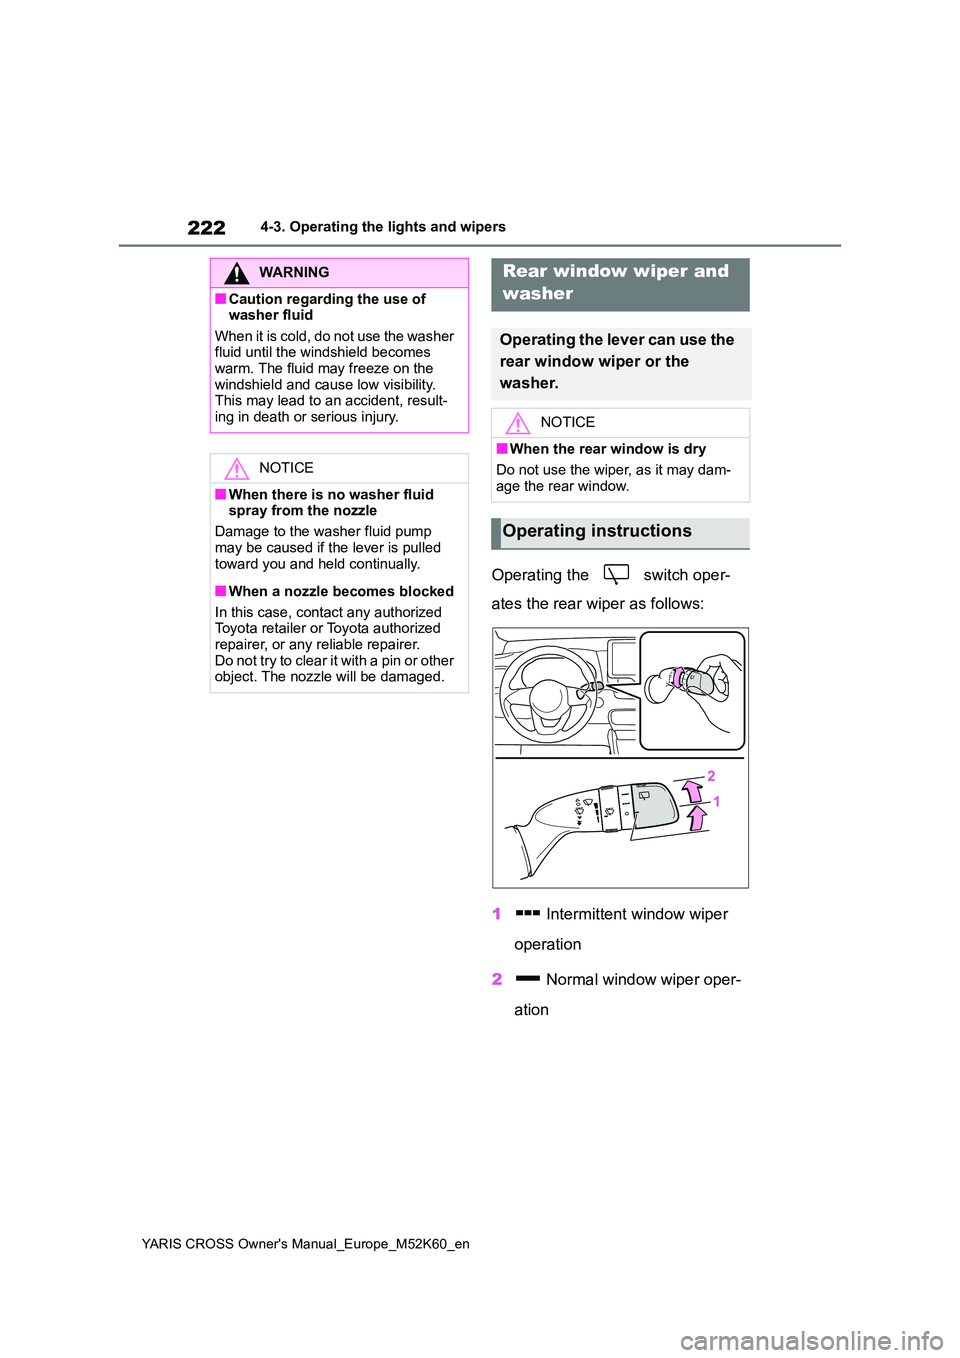 TOYOTA YARIS CROSS 2021 User Guide 222
YARIS CROSS Owner's Manual_Europe_M52K60_en
4-3. Operating the lights and wipers
Operating the   switch oper- 
ates the rear wiper as follows: 
1  Intermittent window wiper  
operation 
2  Nor